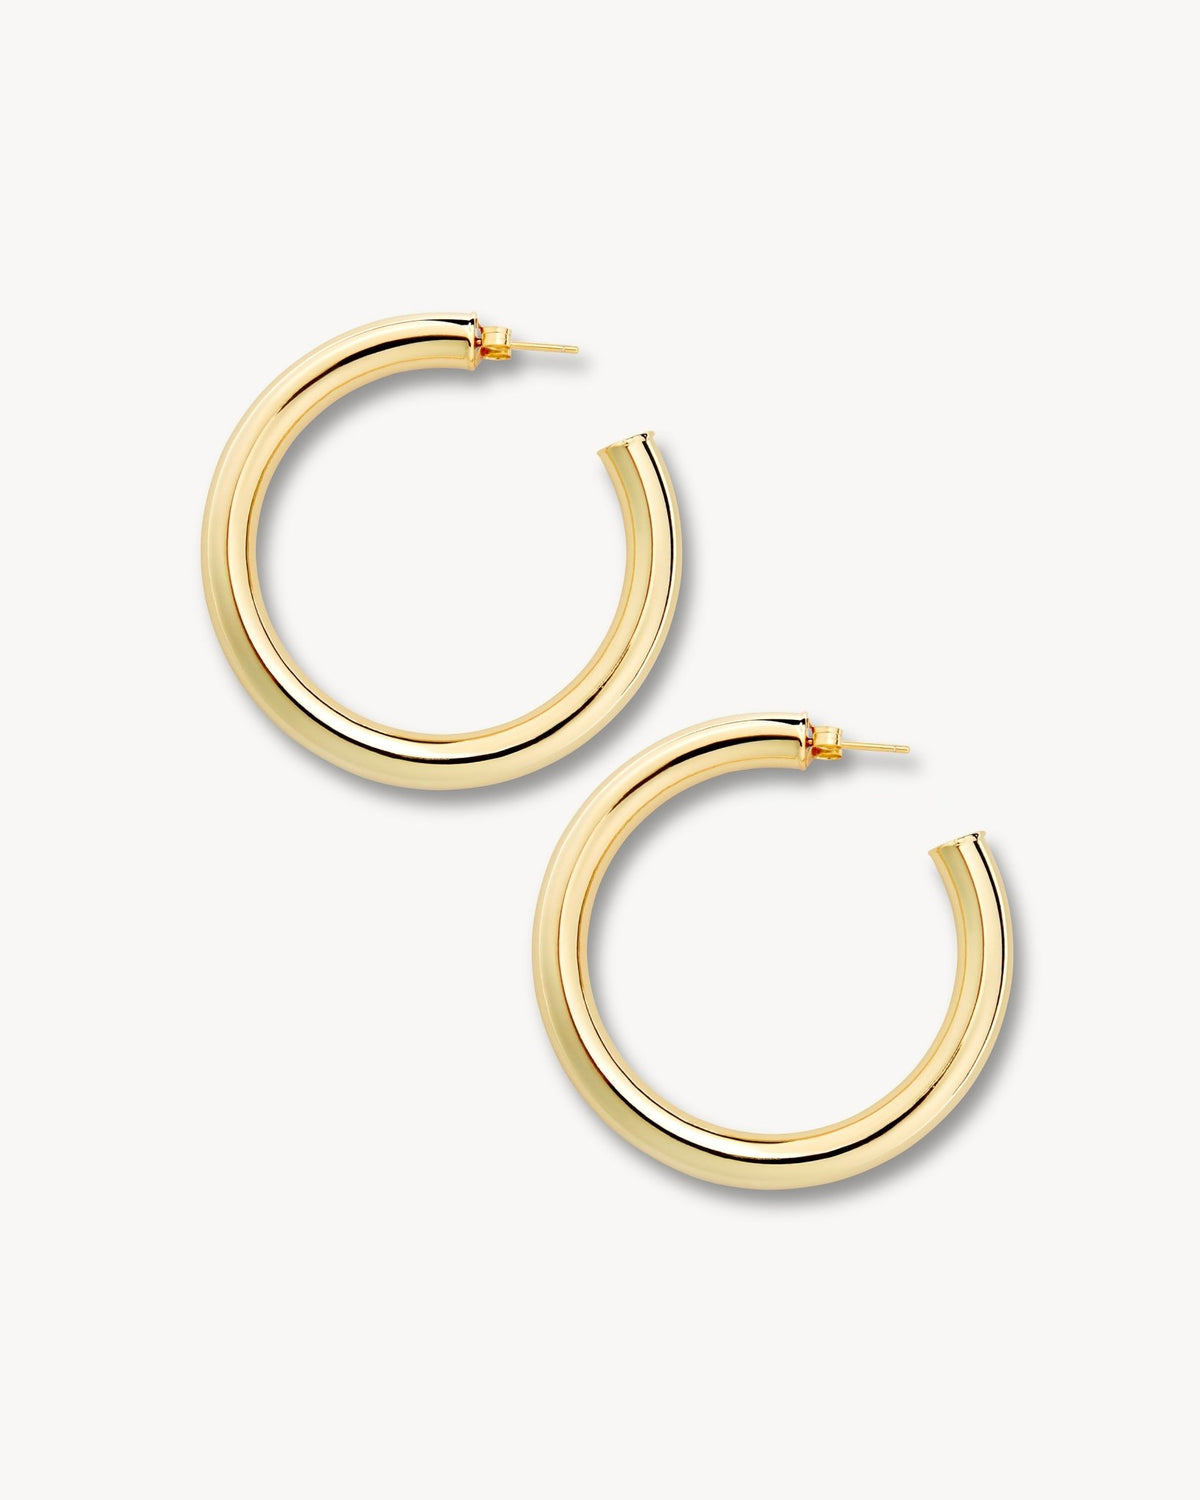 2" Perfect Hoops in Gold